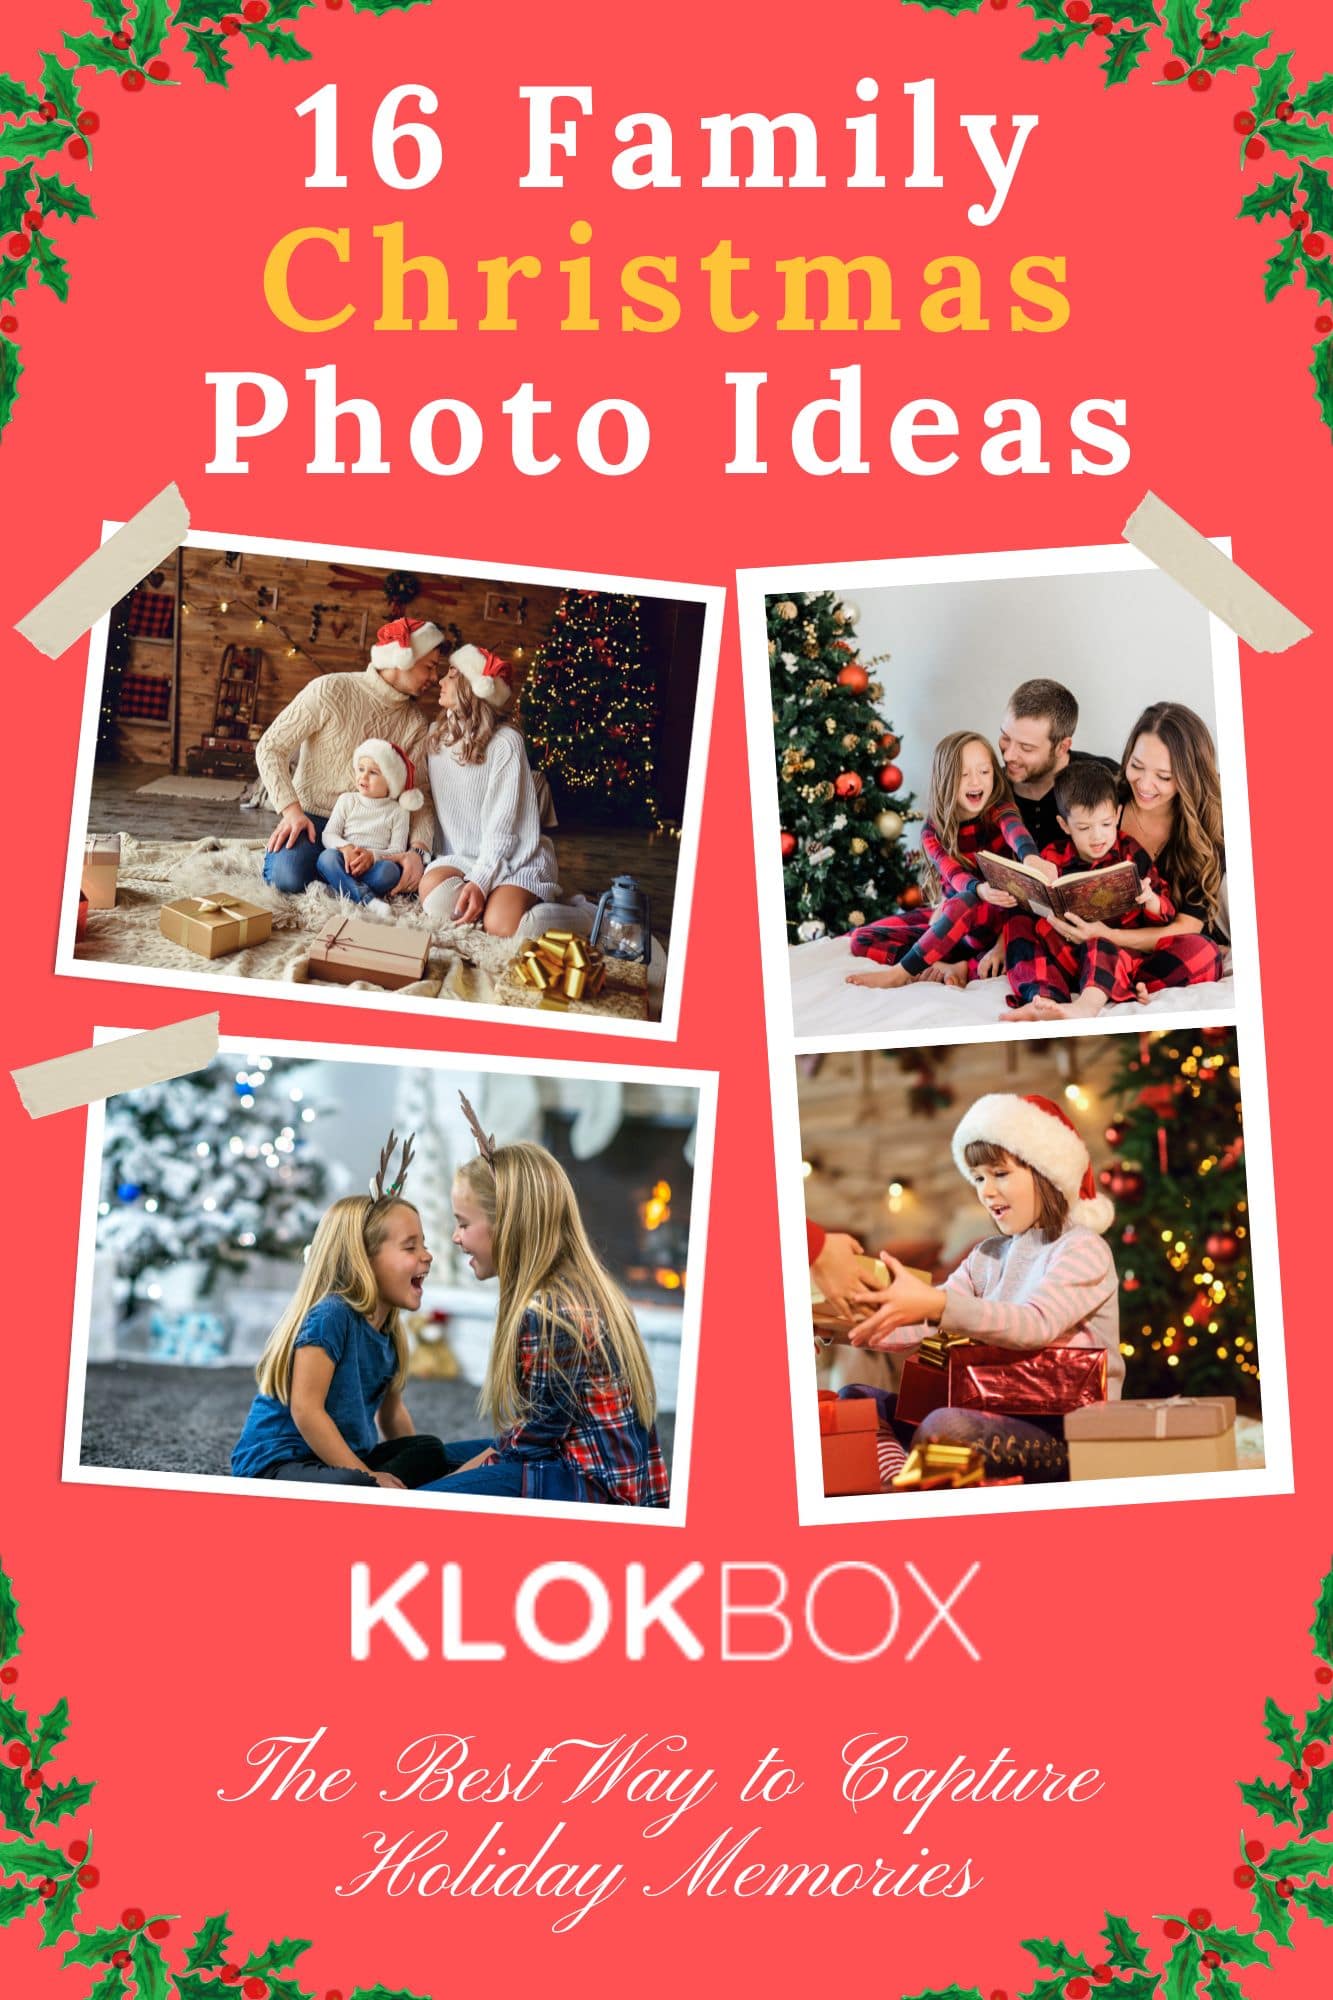 16 Family Christmas Photo Ideas - The Best Way to Capture Holiday Memories